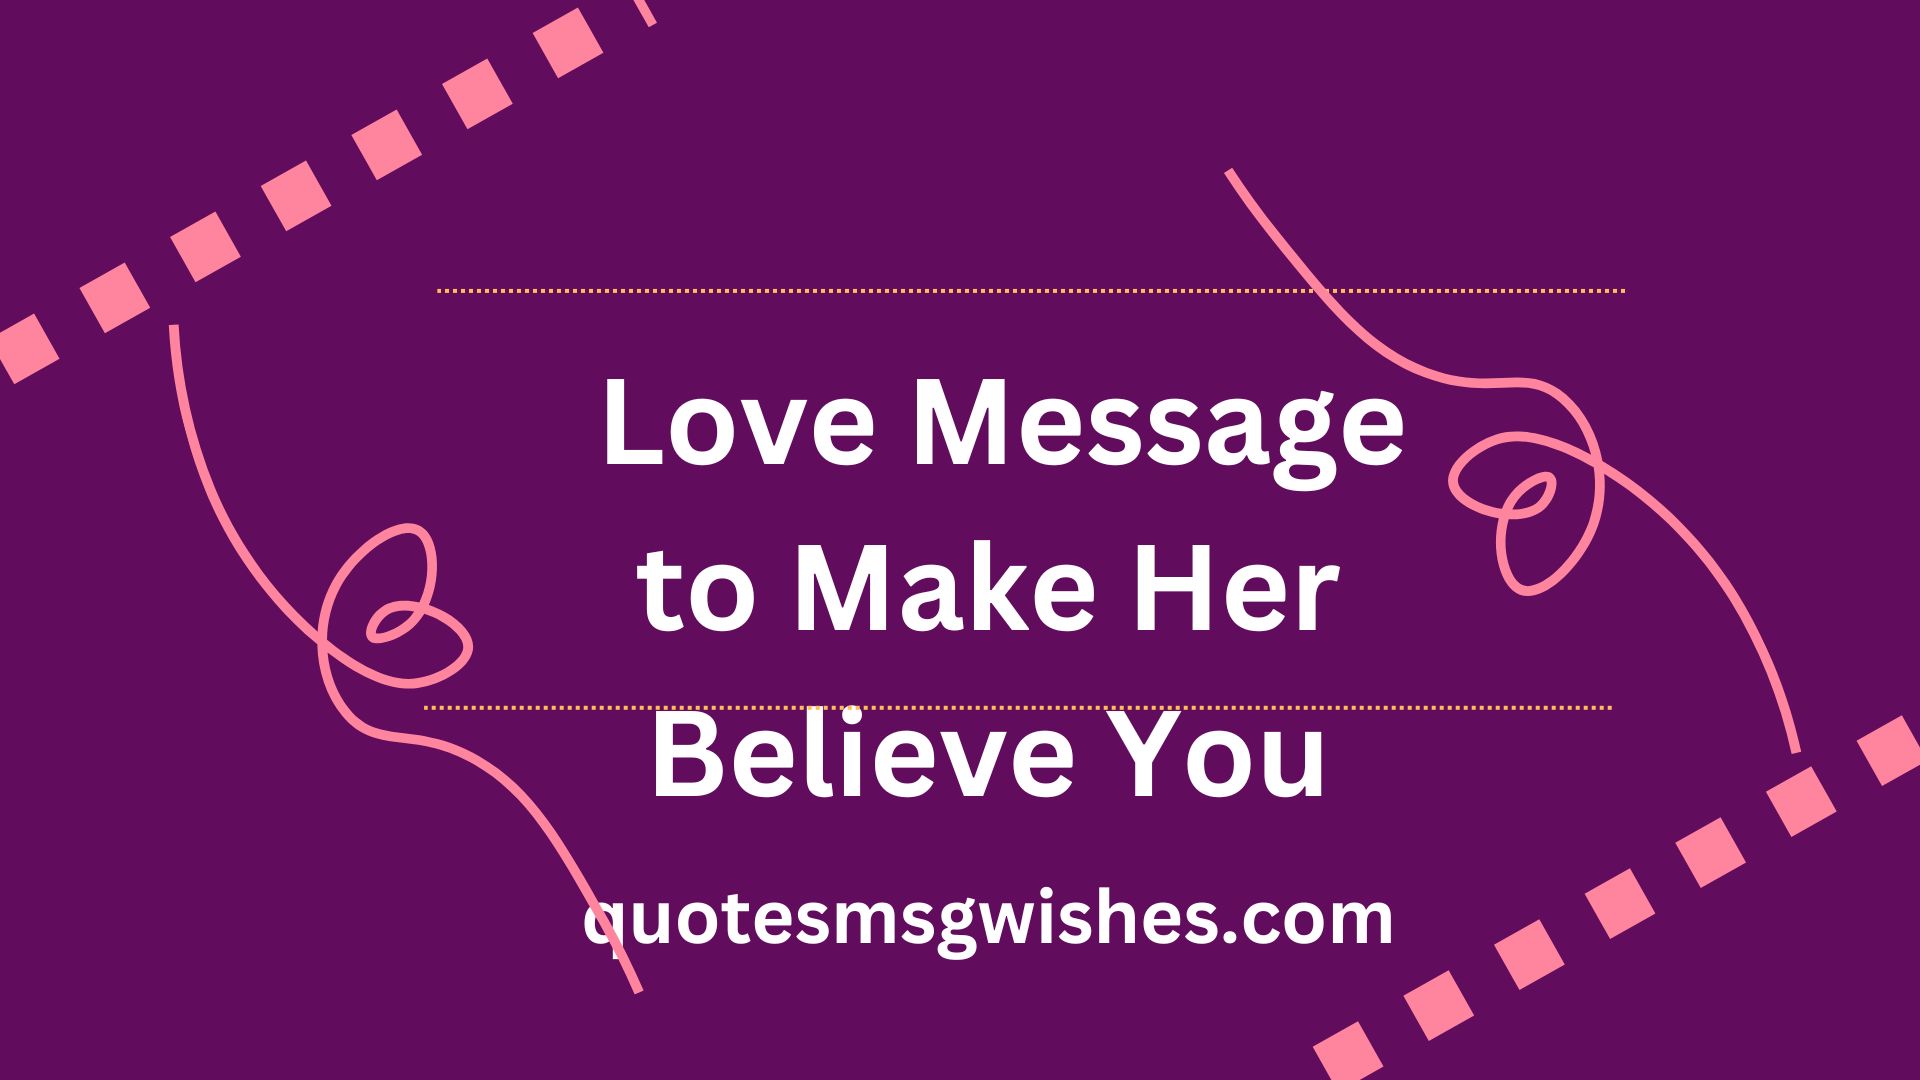 Love Message to Make Her Believe You